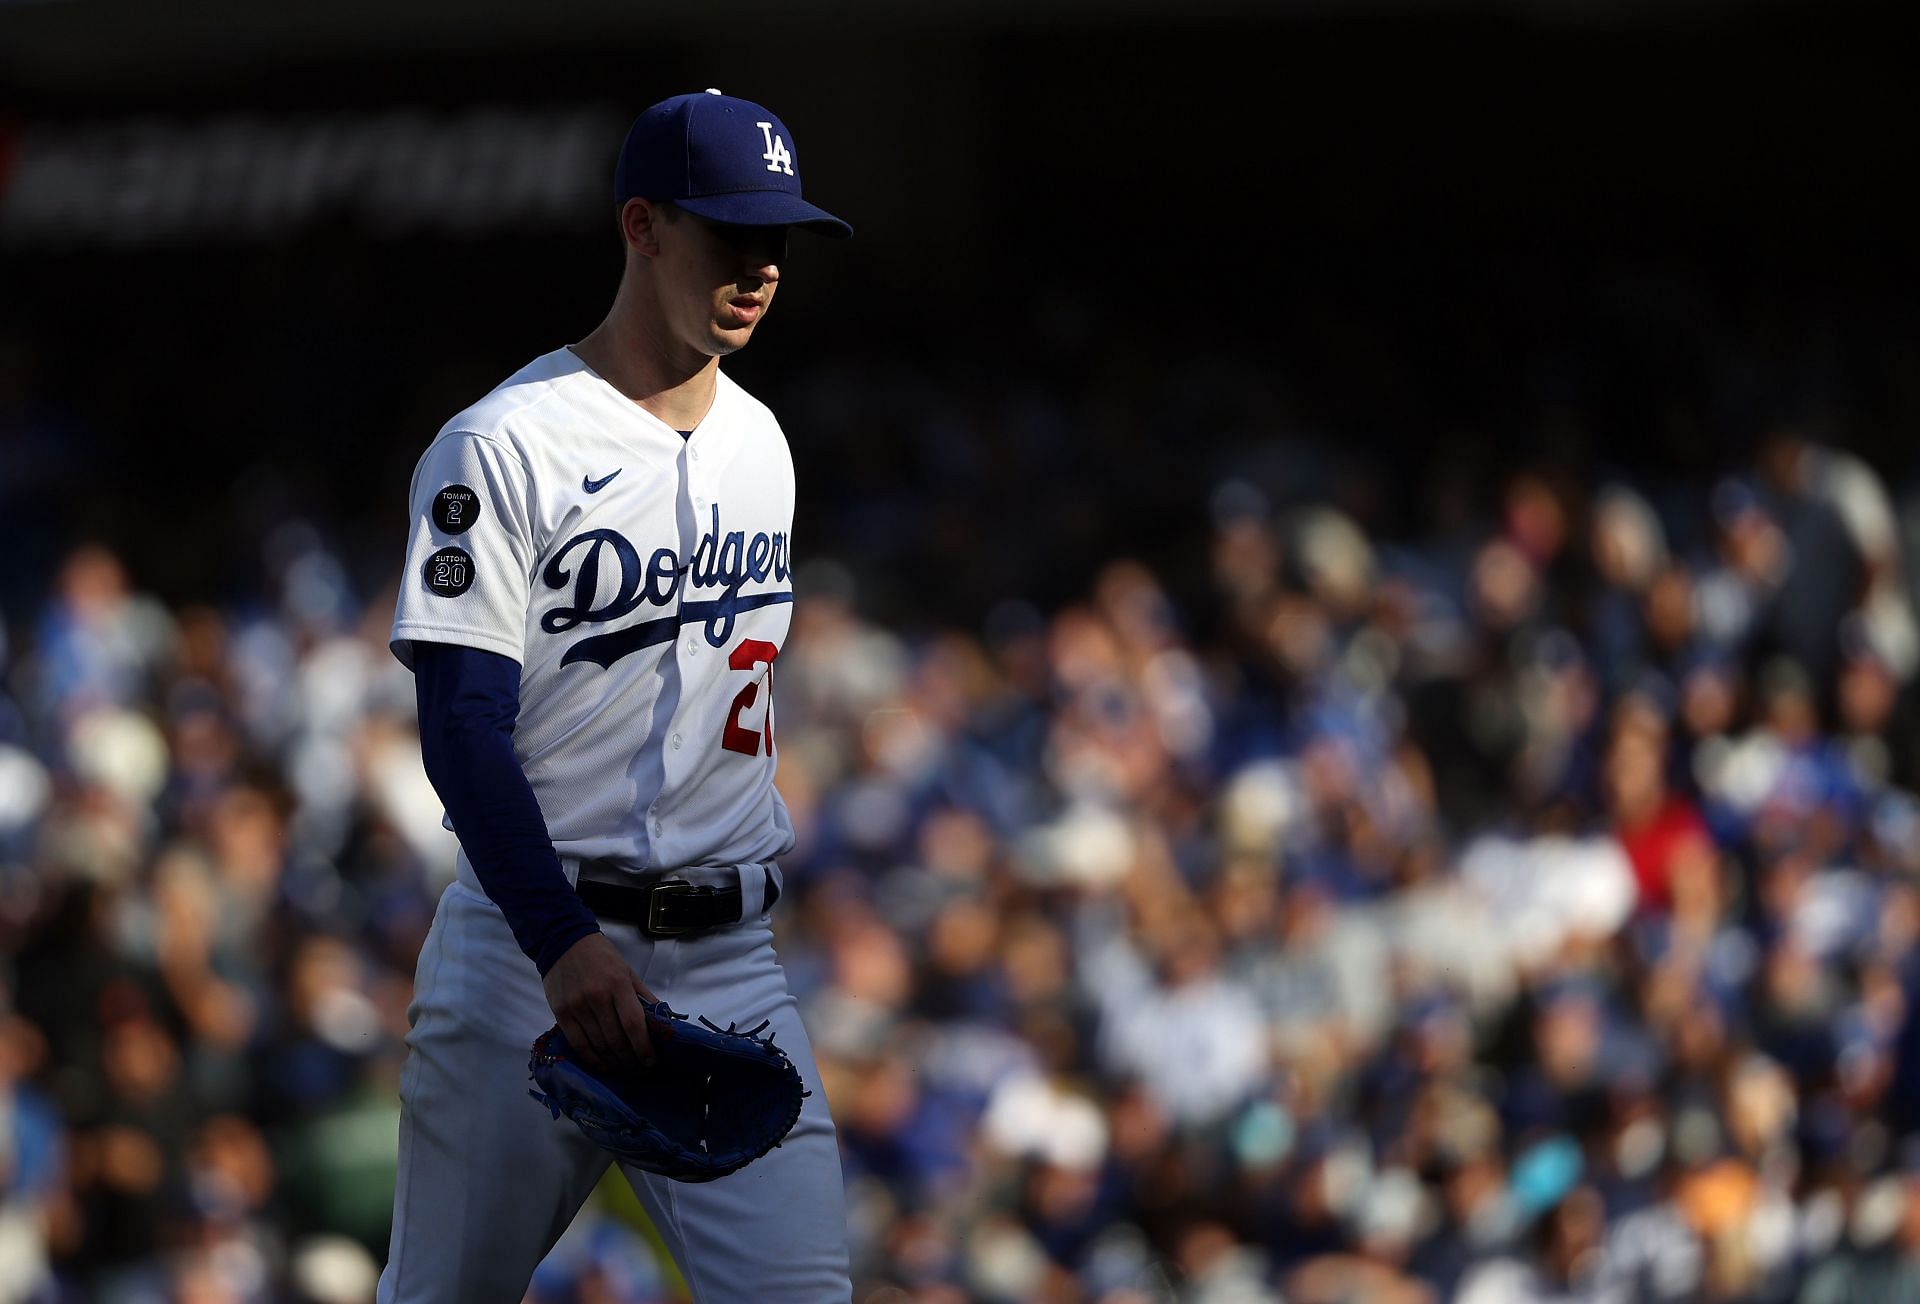 Watch: Los Angeles Dodgers ace Walker Buehler slams glove into bat stands,  shows displeasure with his outing